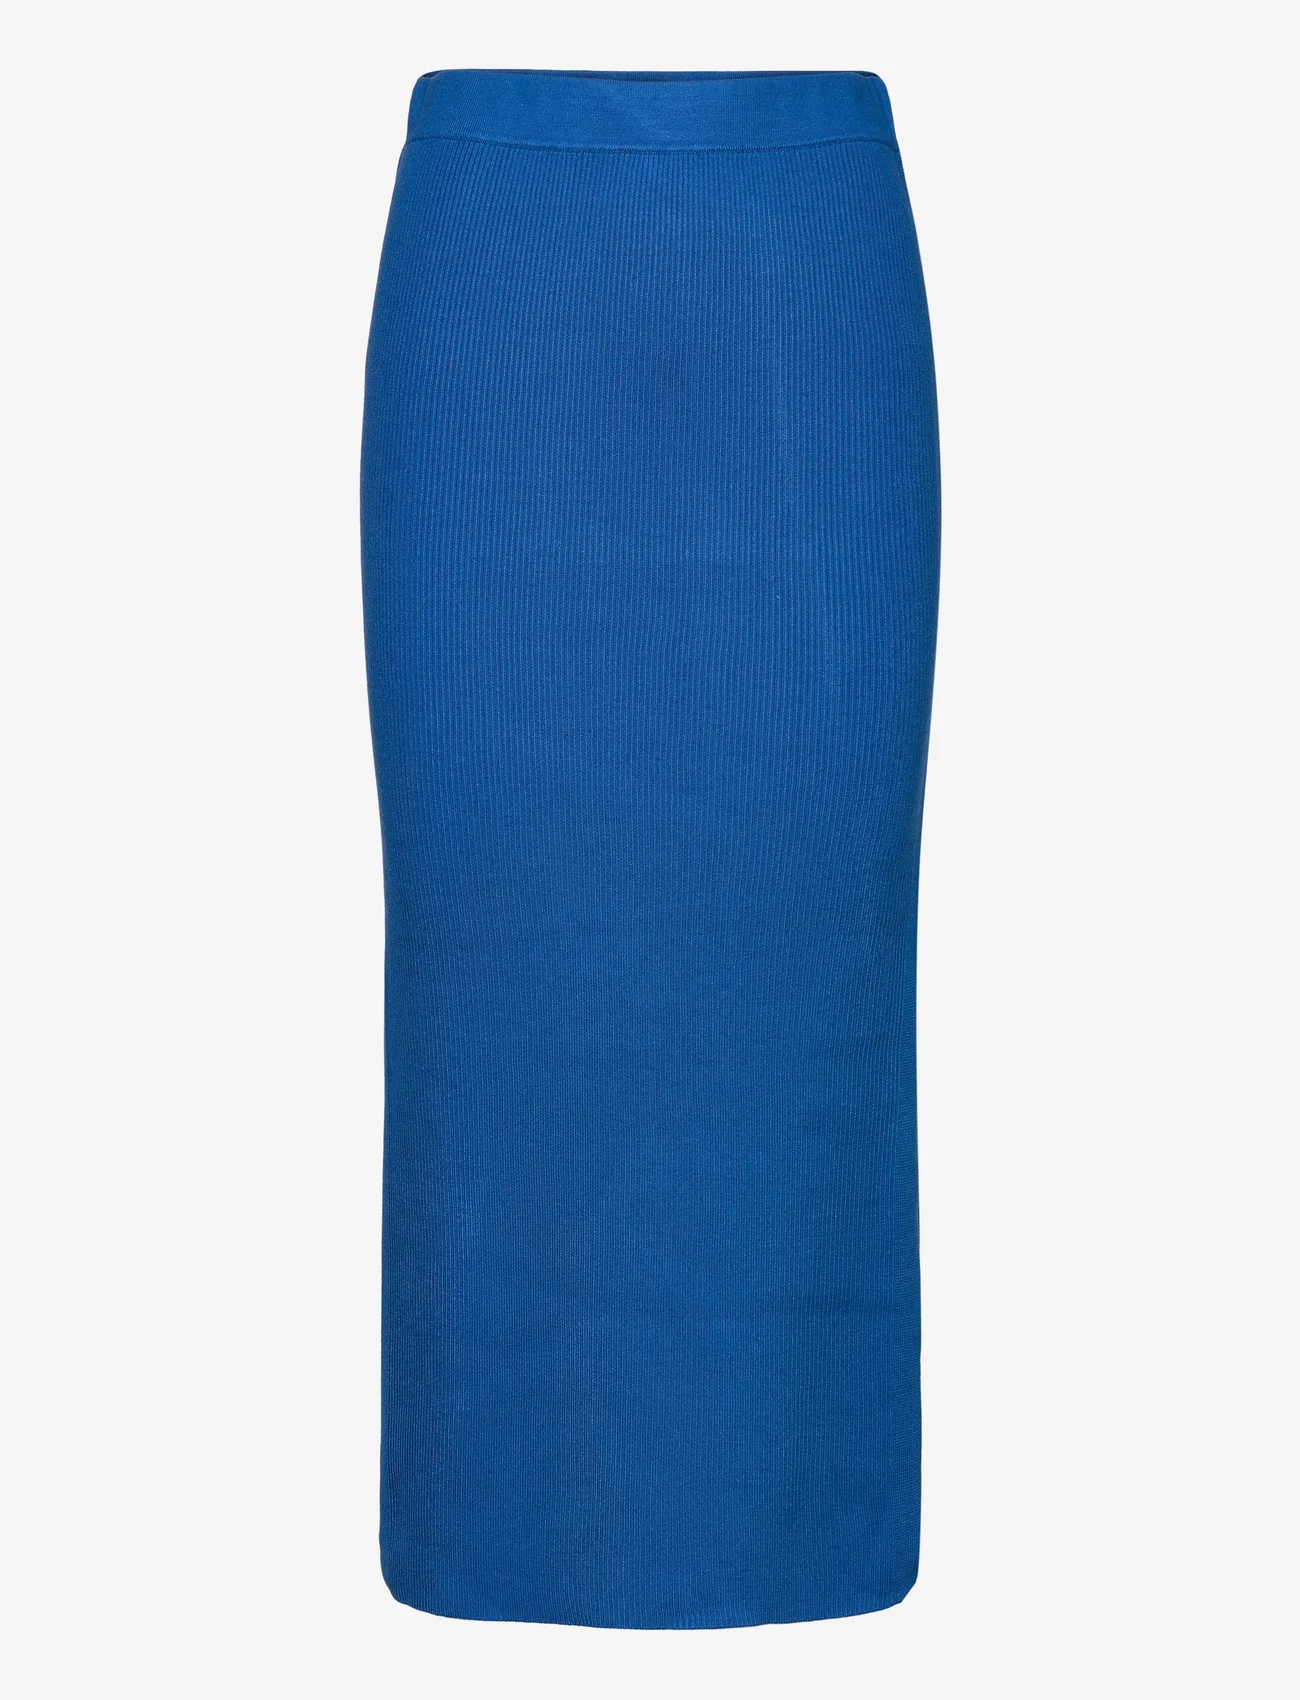 NORR - Sherry knit skirt - knitted skirts - royal blue - 0